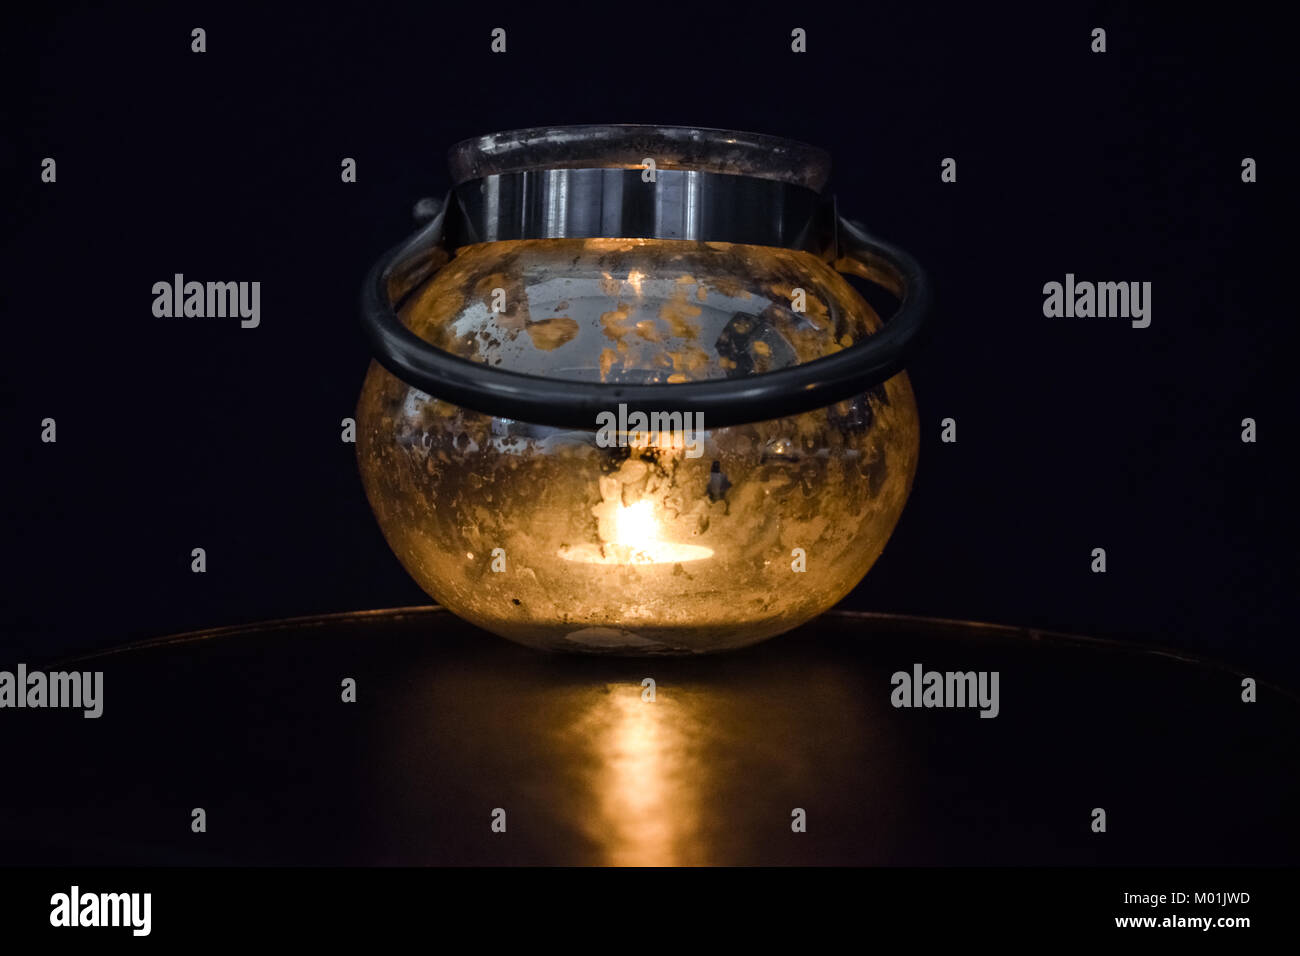 Burning candle in glass Stock Photo